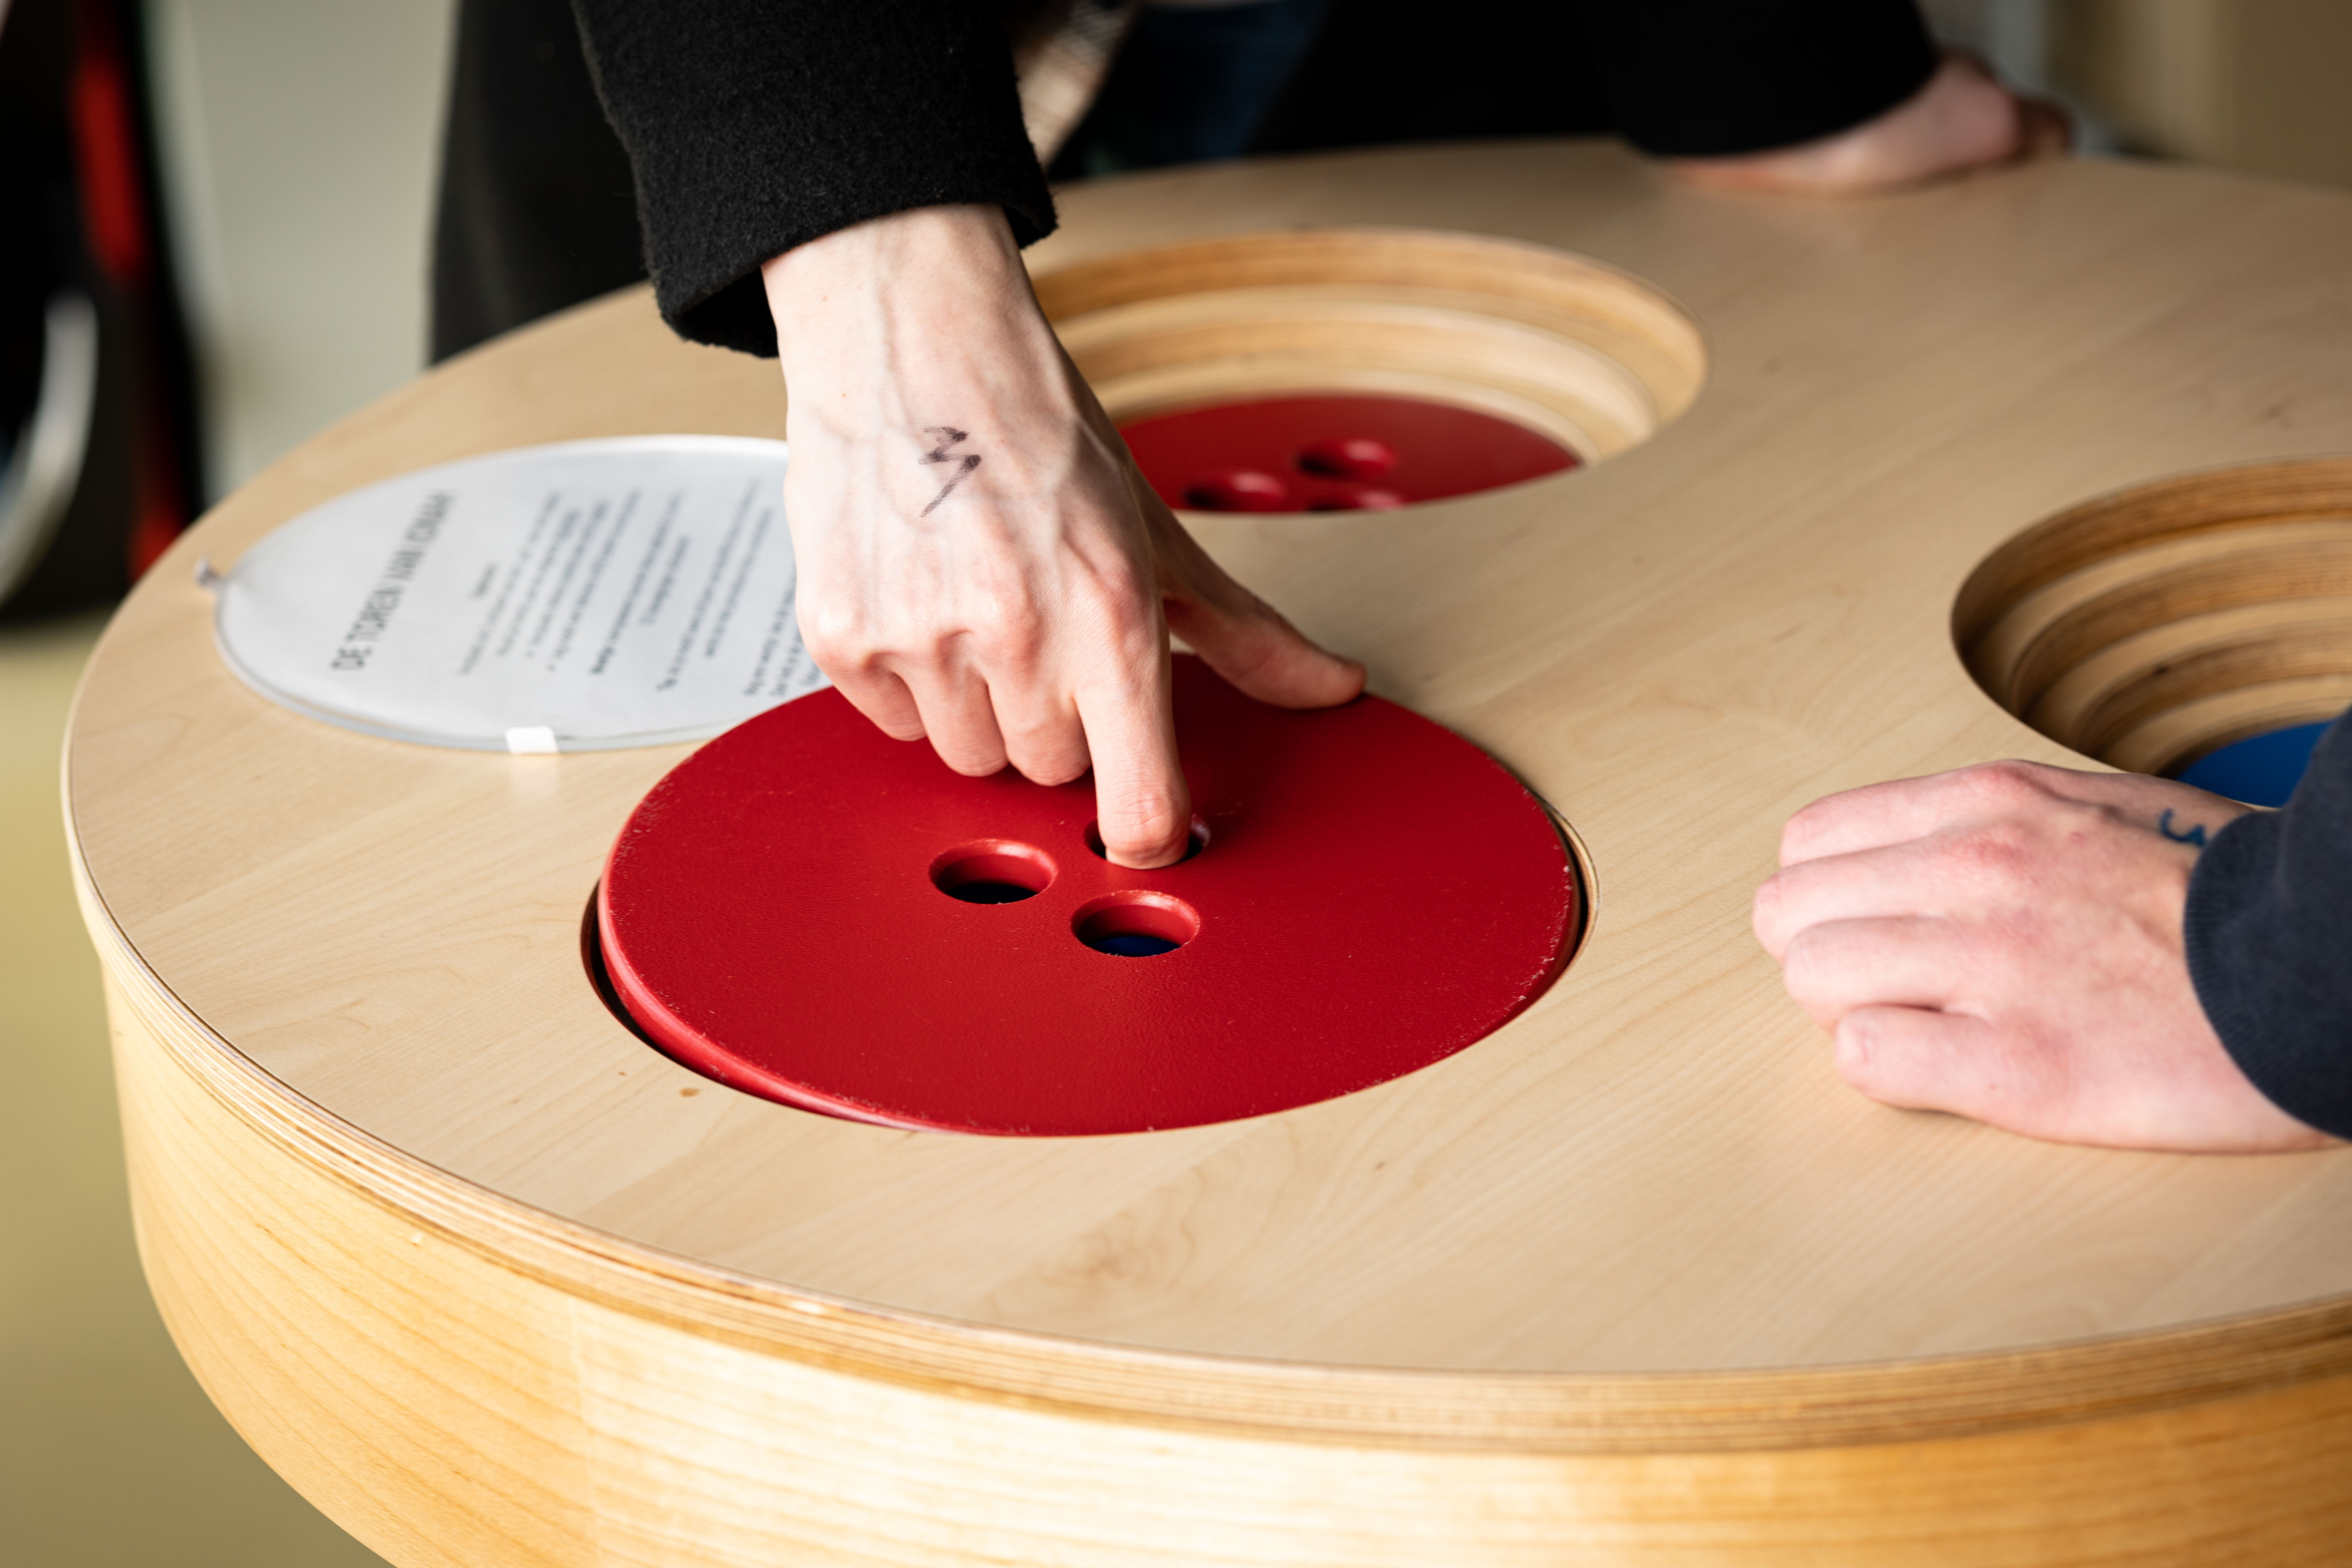 A student moves a disk of the mathematical puzzle "The Tower of Ionah" | Image by Leoni von Ristok.